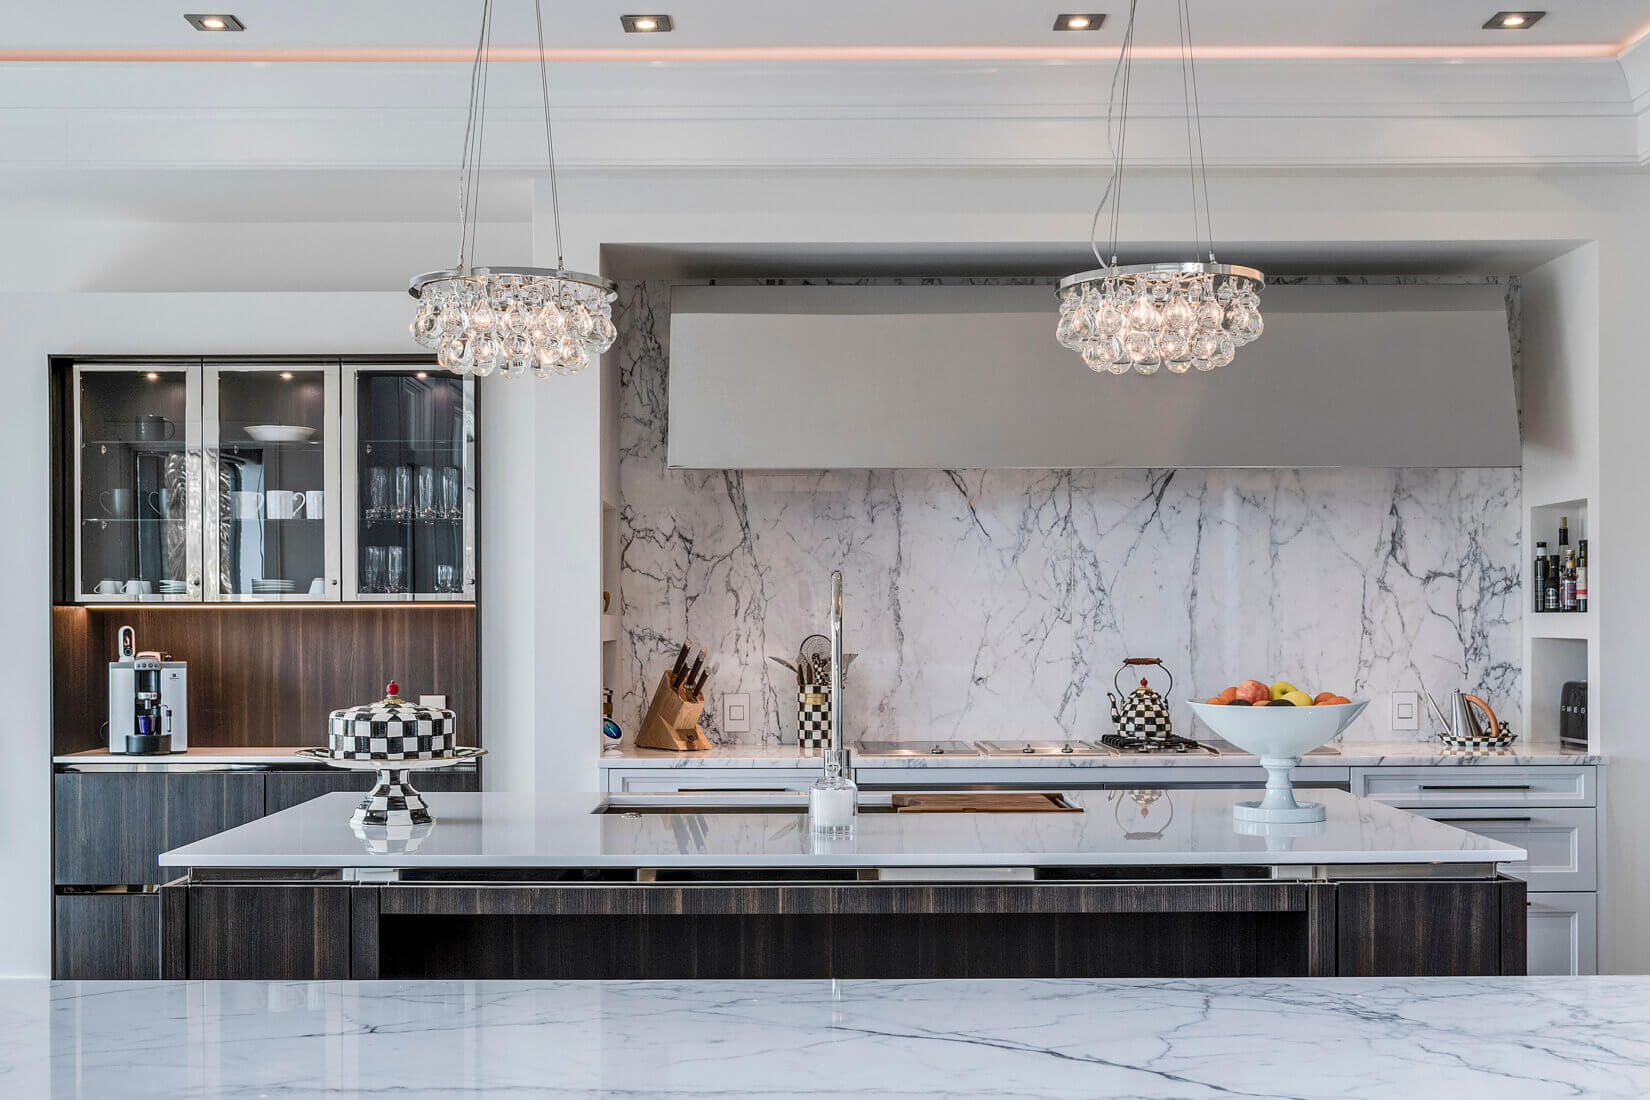 Elegant kitchen with white marble backsplash and glass chandeliers